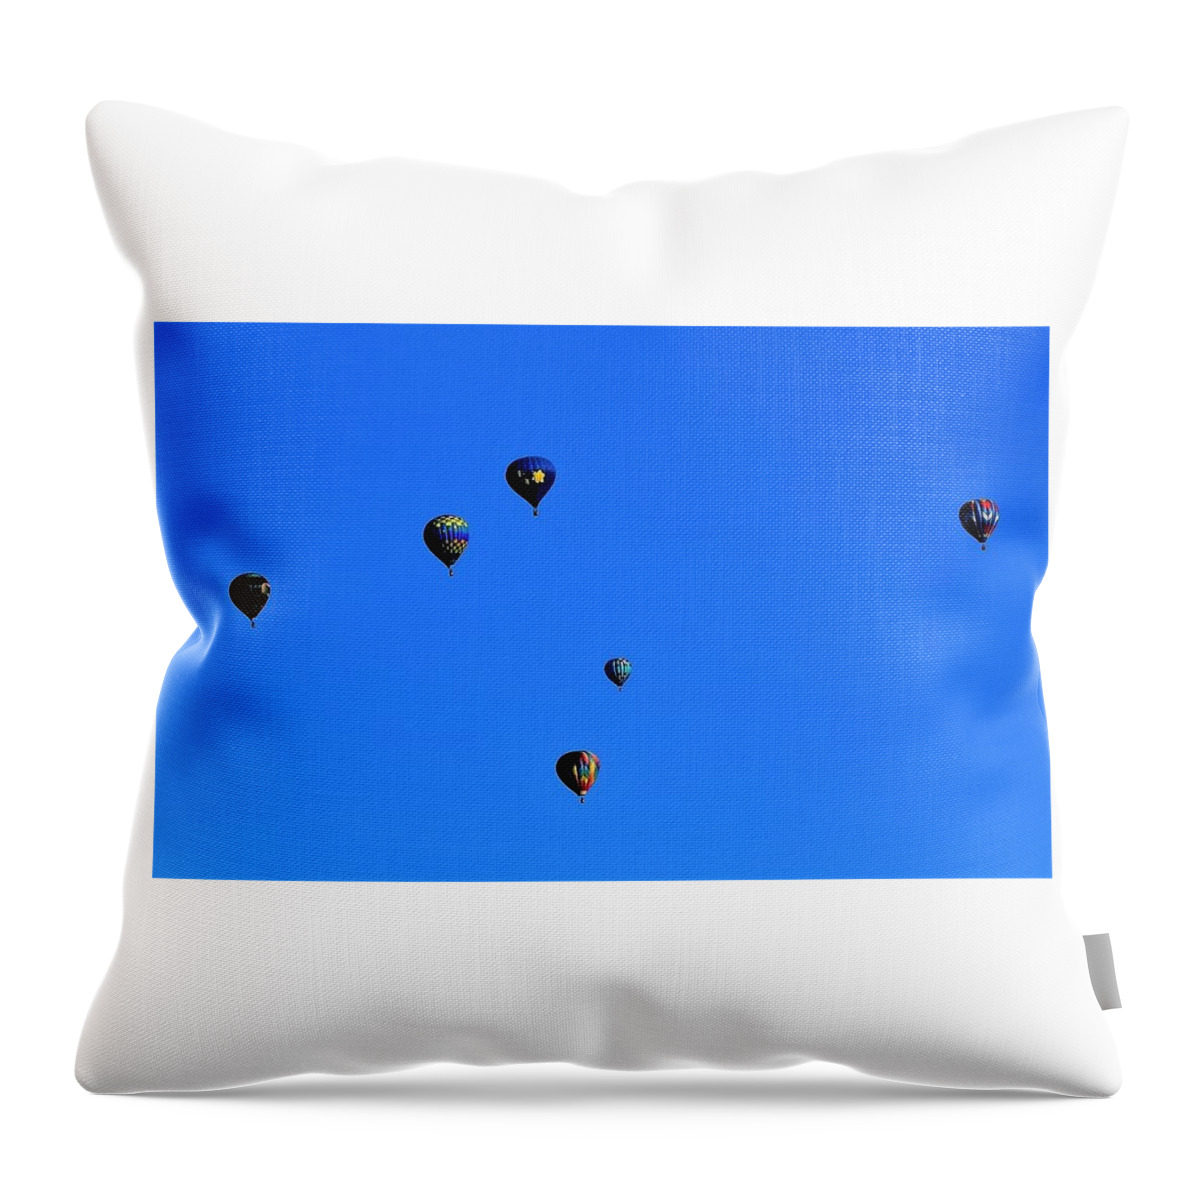 Hot Air Balloons Throw Pillow featuring the photograph Come Together by John Glass